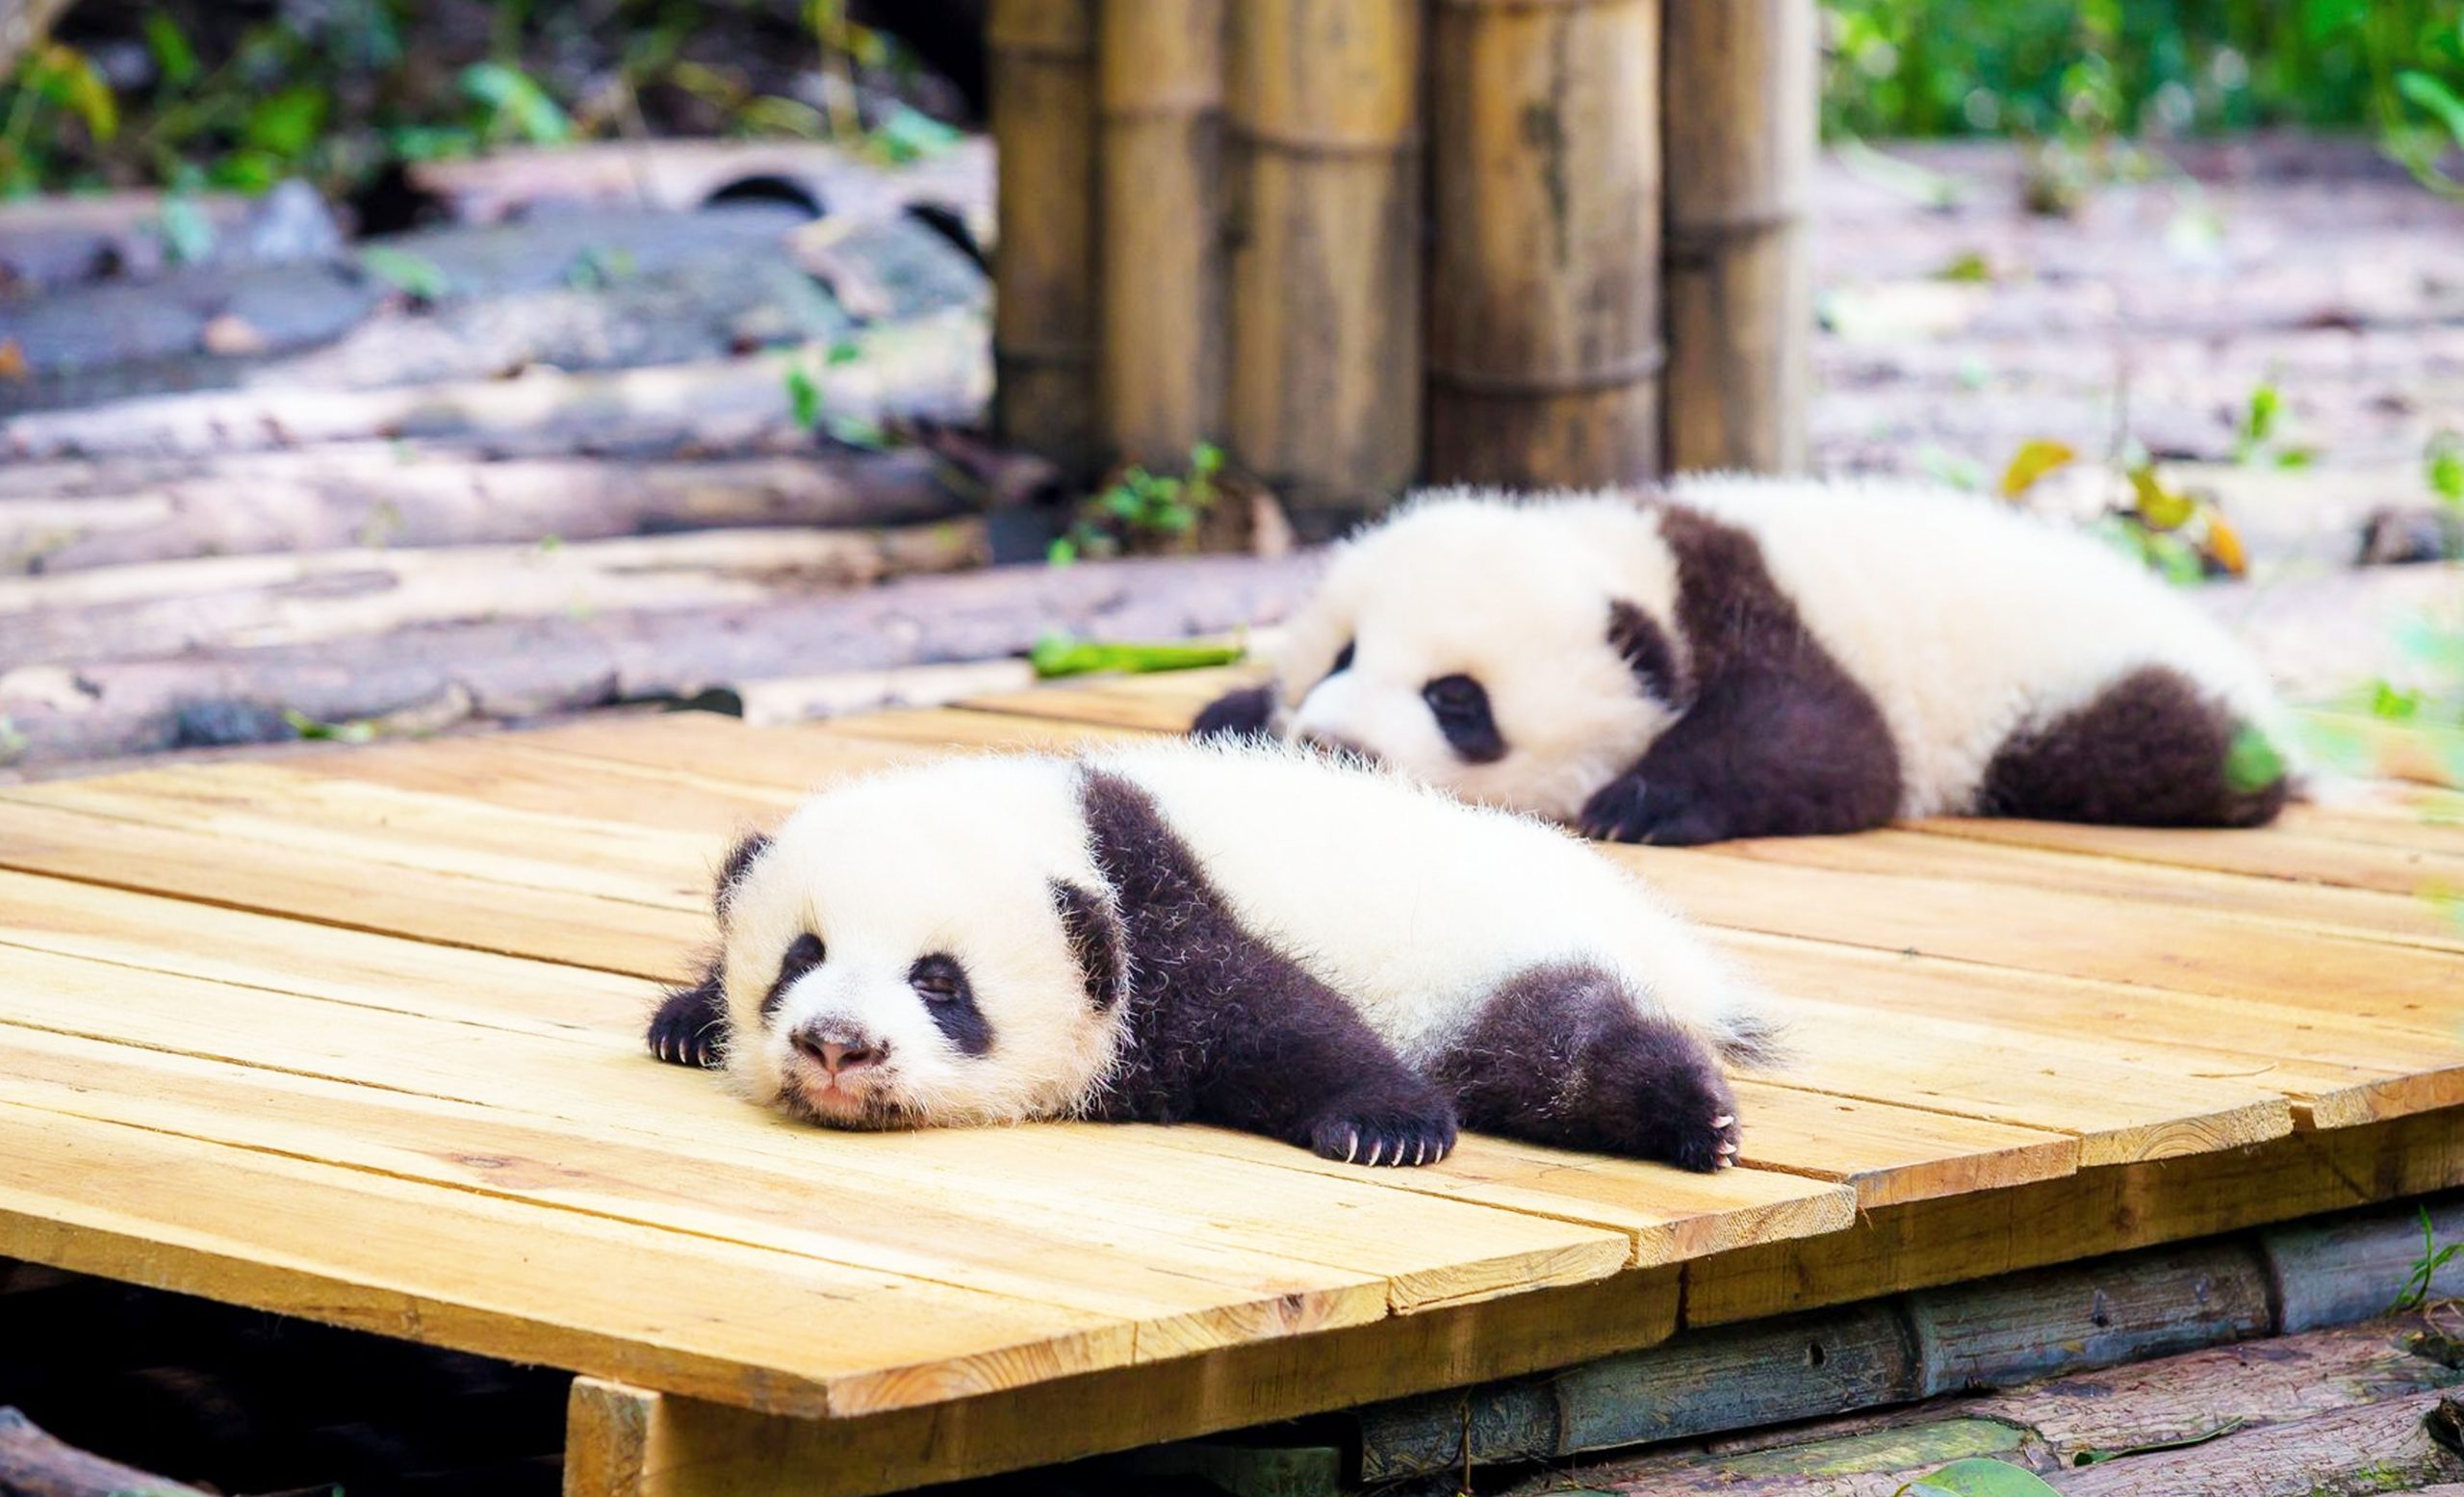 How Big Are Baby Pandas?